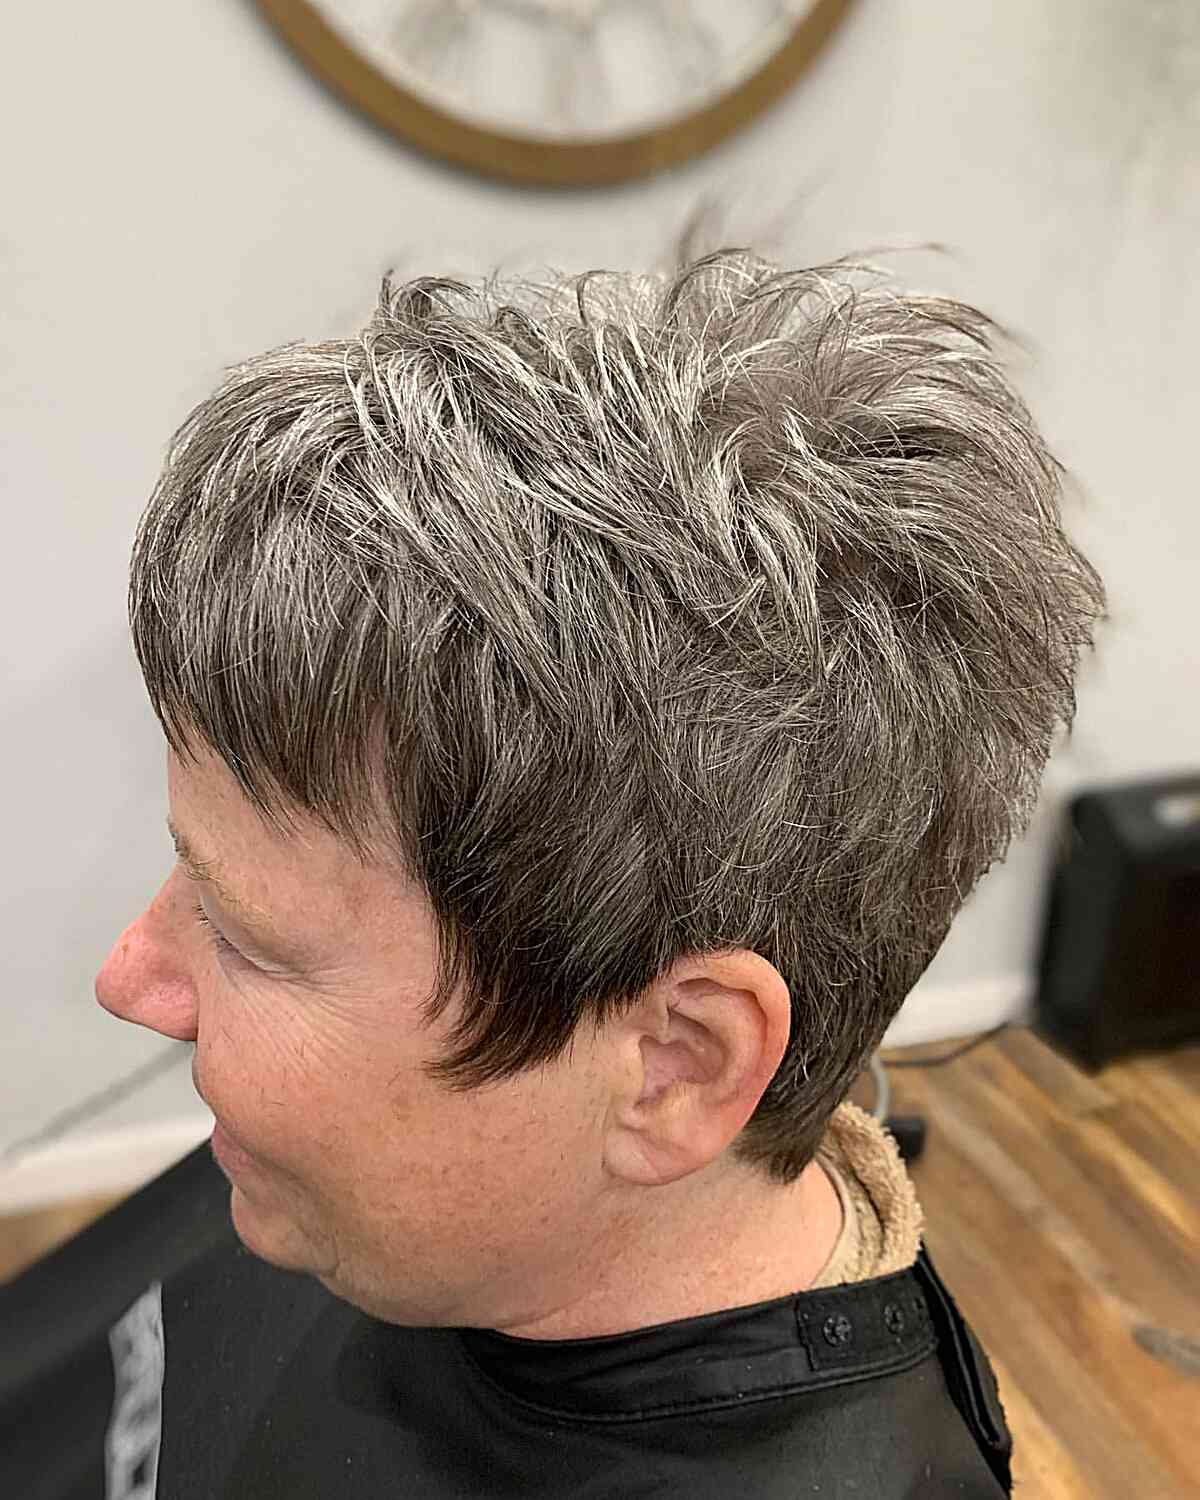 Short Choppy Tapered Pixie with Short Bangs for Older Women Aged 60 with Grey Hair